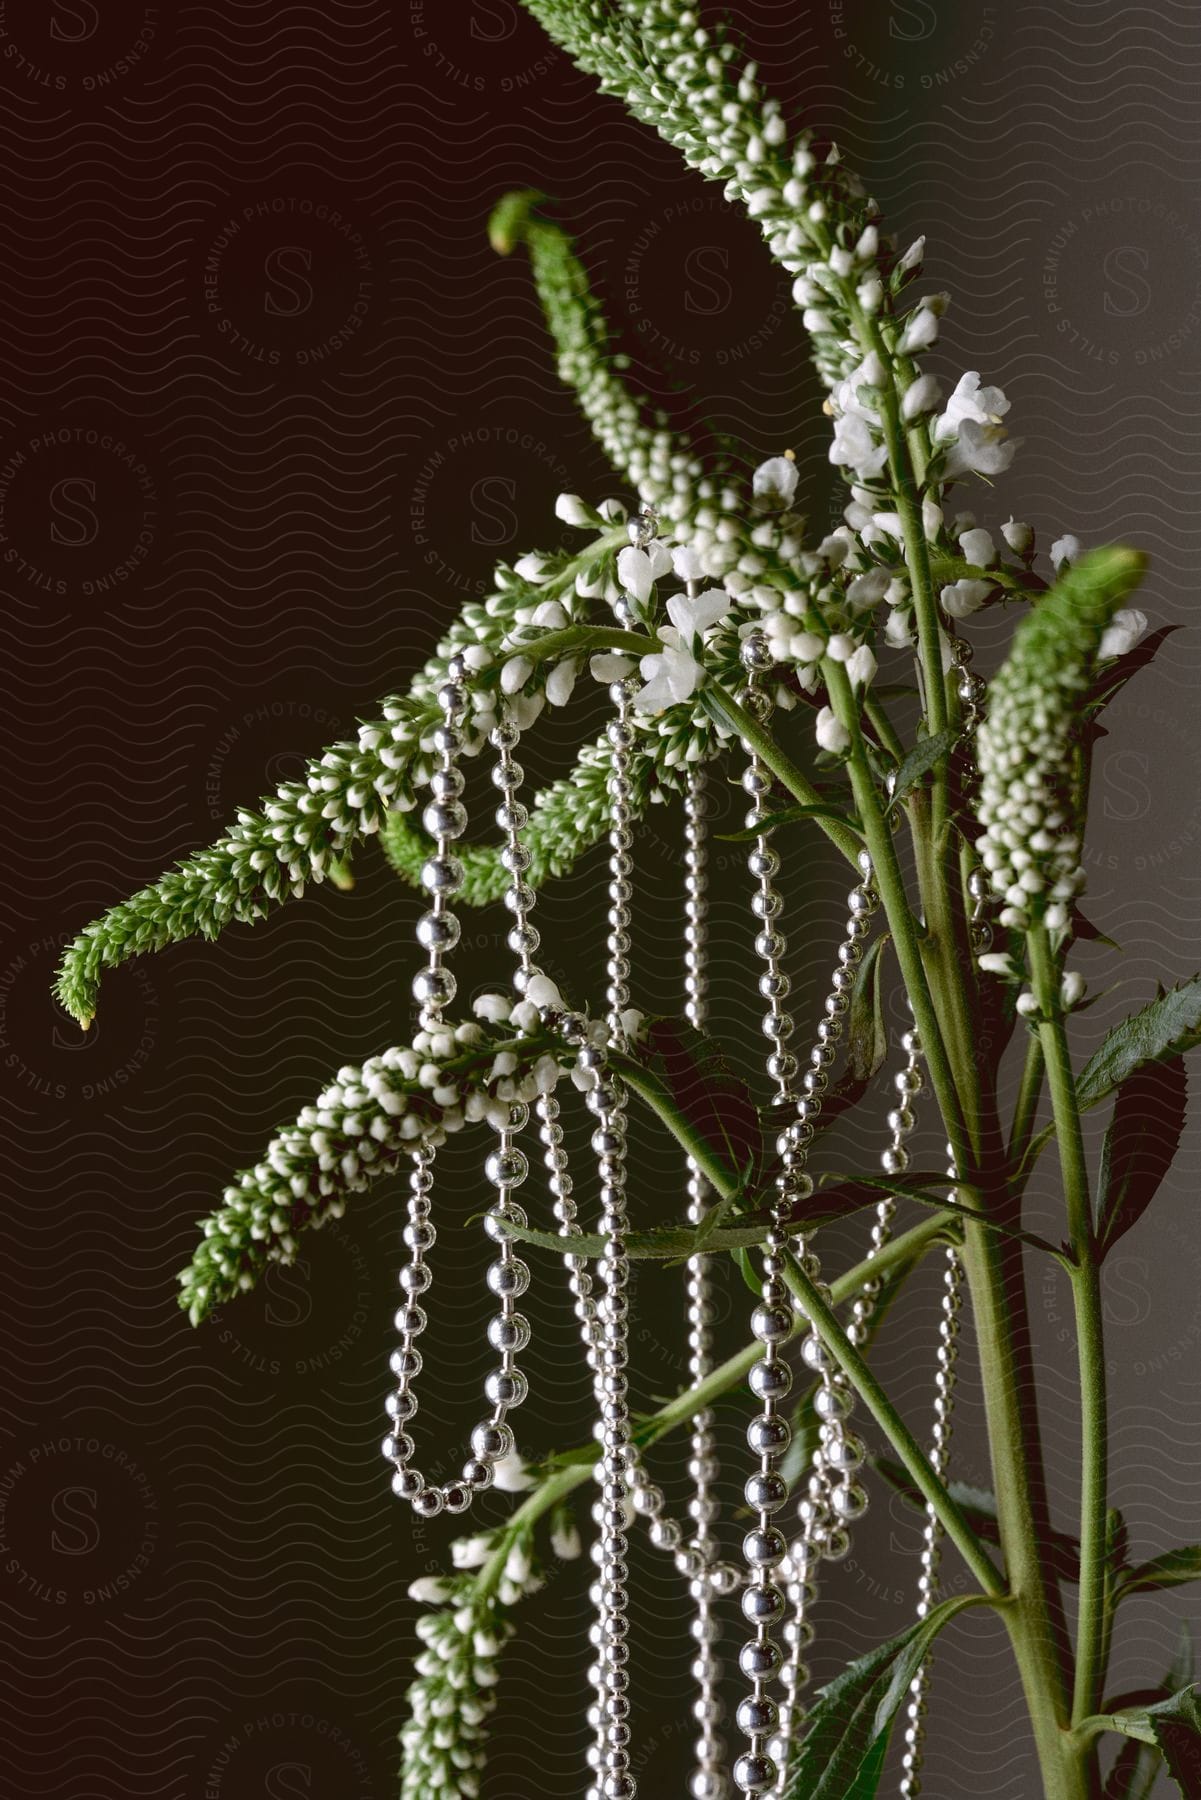 Still Life of a plant with a green stem and flowers emerging from white petals with a necklace of silver polka dots.